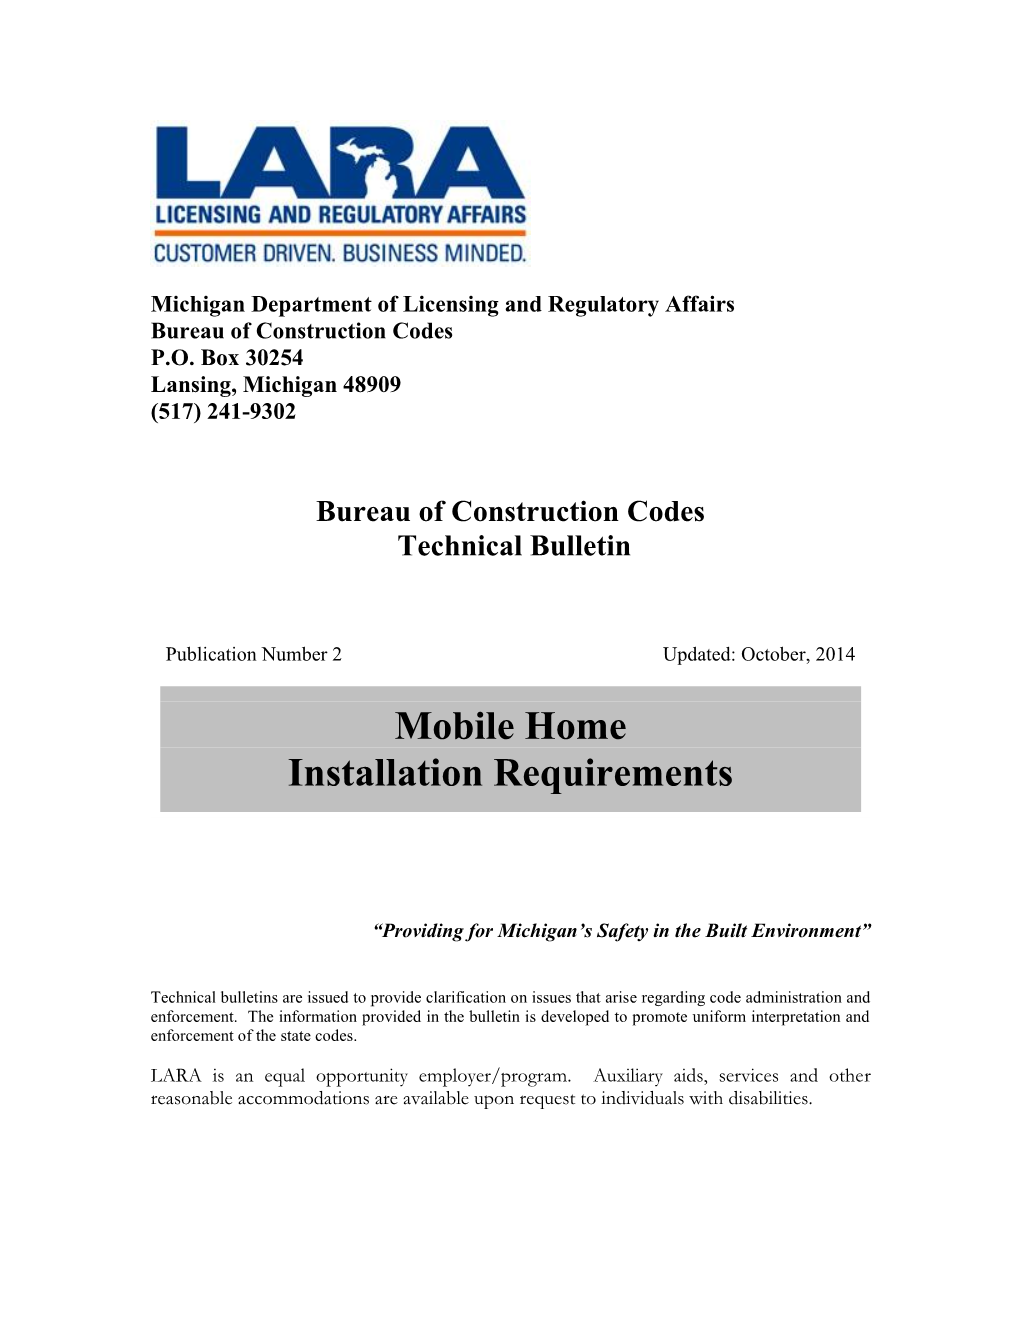 Mobile Home Installation Requirements